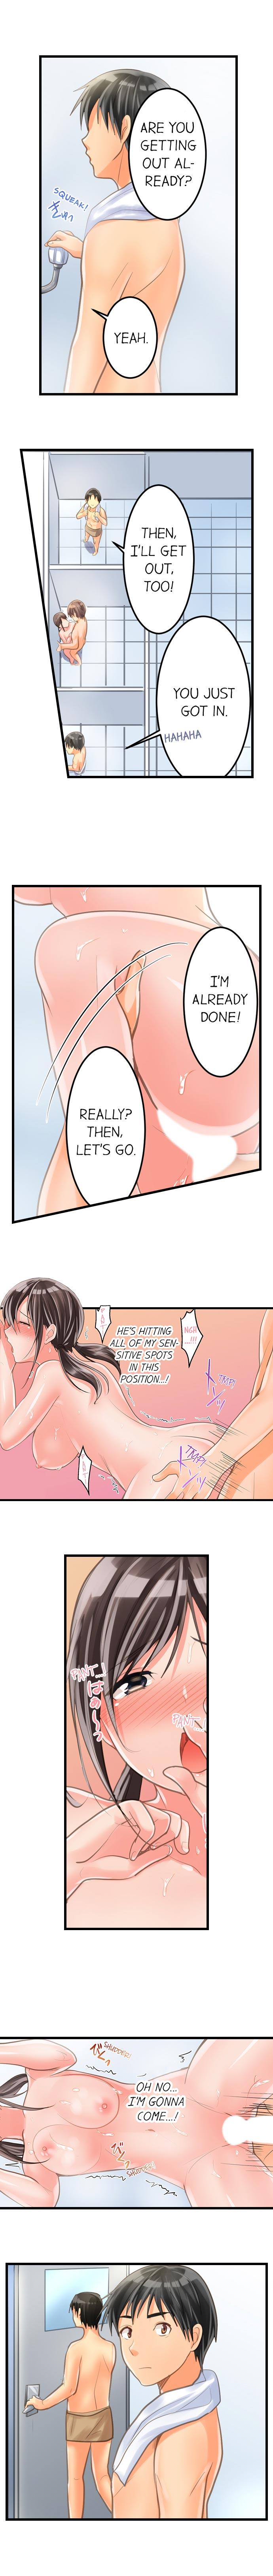 The Day She Became a Sex Toy (Complete] 52